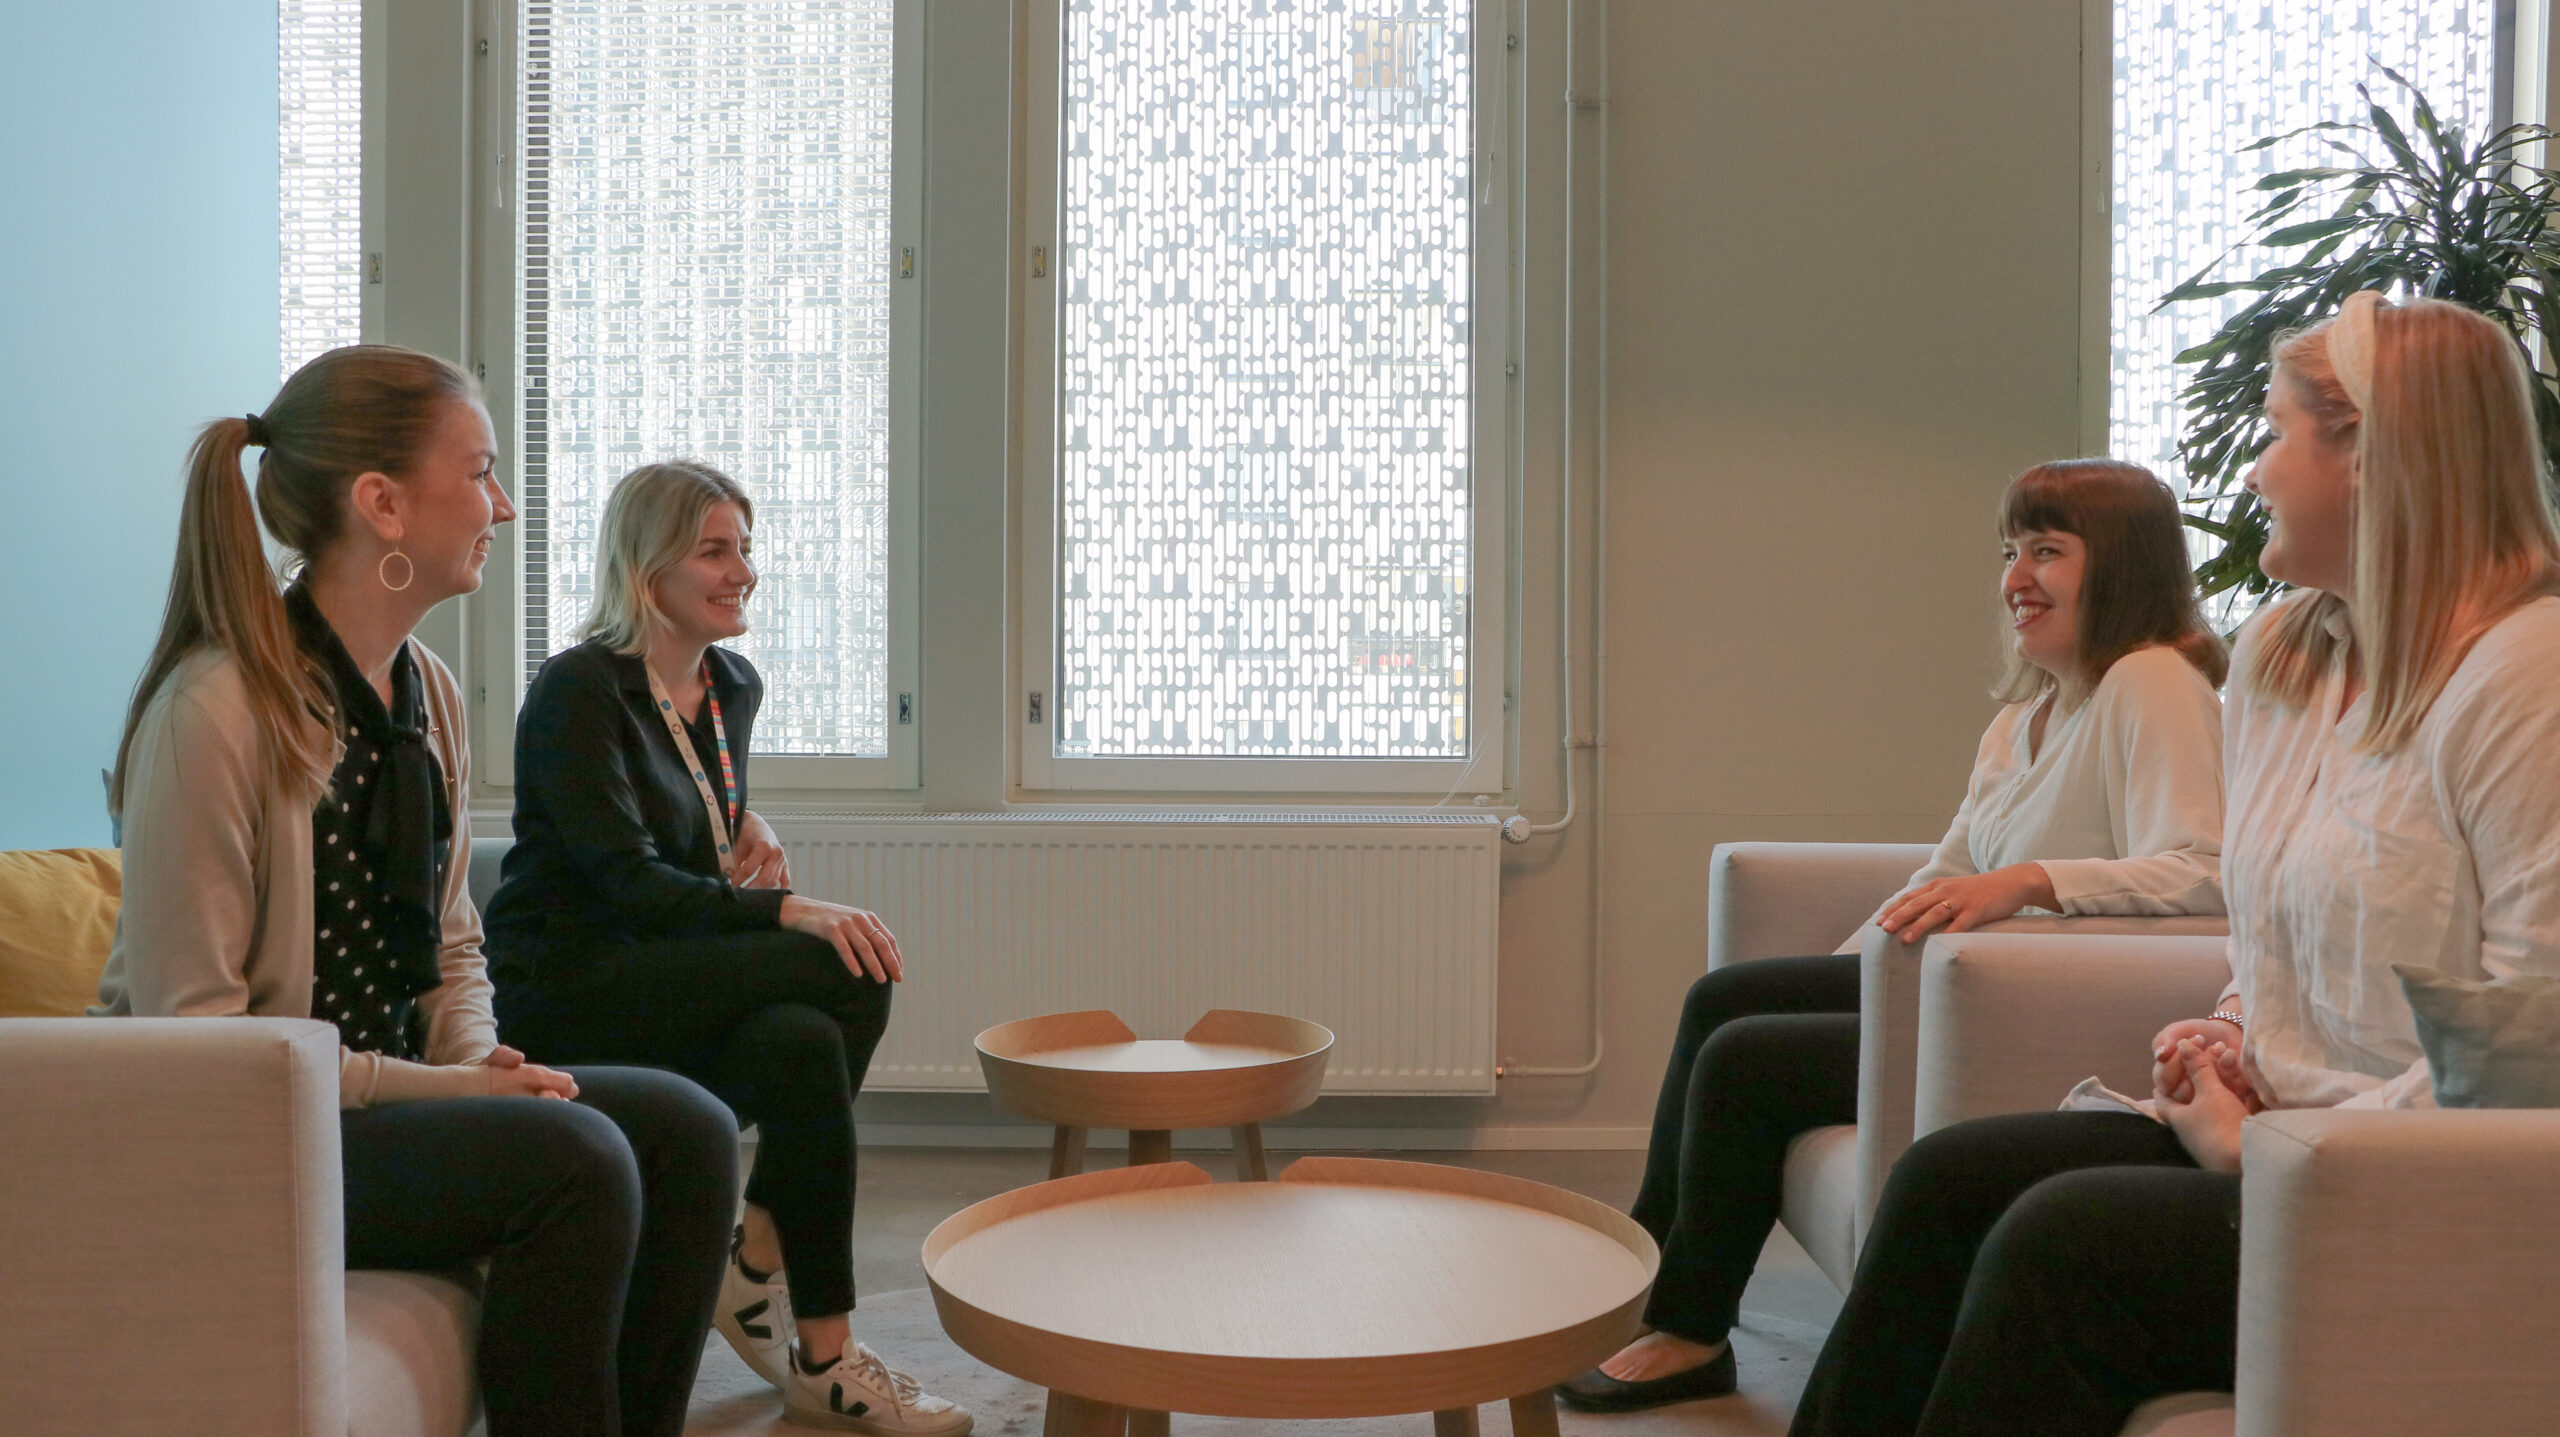 Karoliina Hurmerinta, Mia Kaurila, and Jonna Rajavuori sat down to talk about the buddy class activities. Sustainable development manager Helena Kyrki also participated in the discussion. 